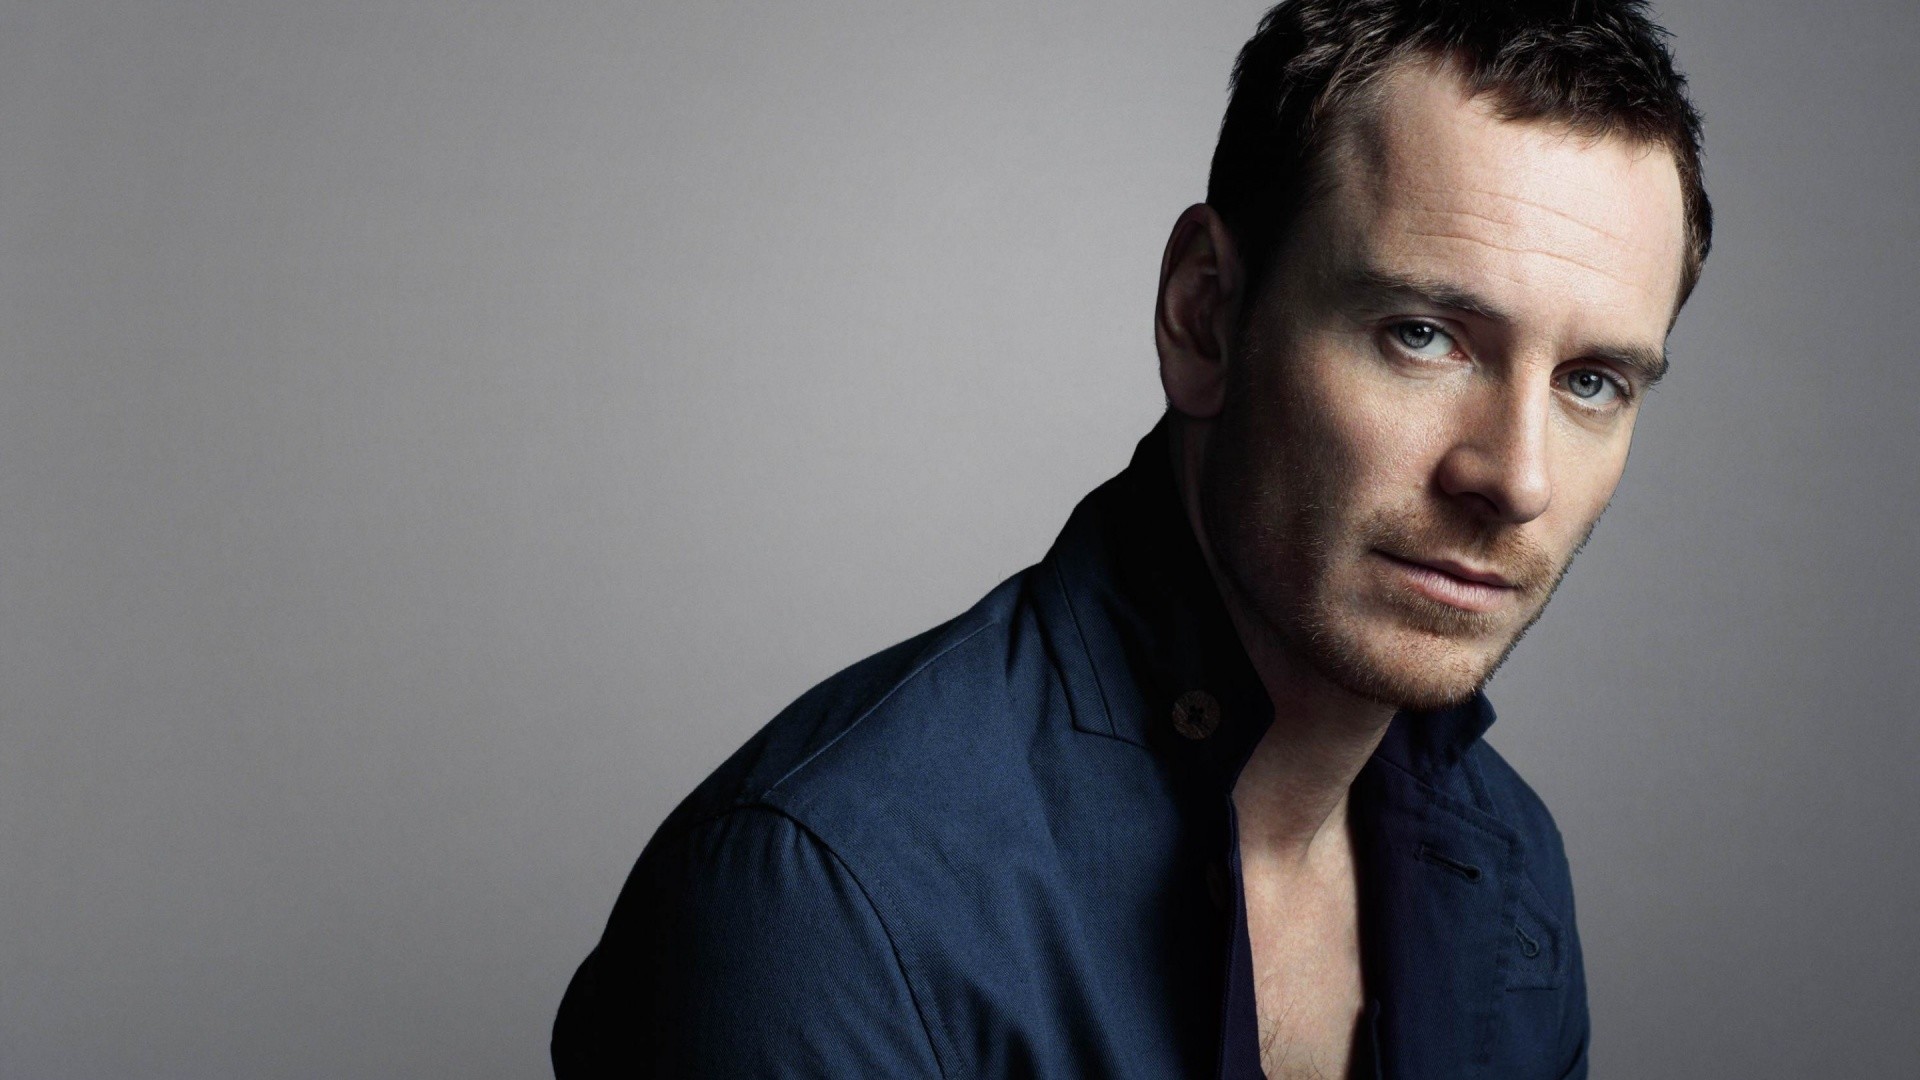 1920x1080 Michael Fassbender to Replace Christian Bale in Steve Jobs Biopic?